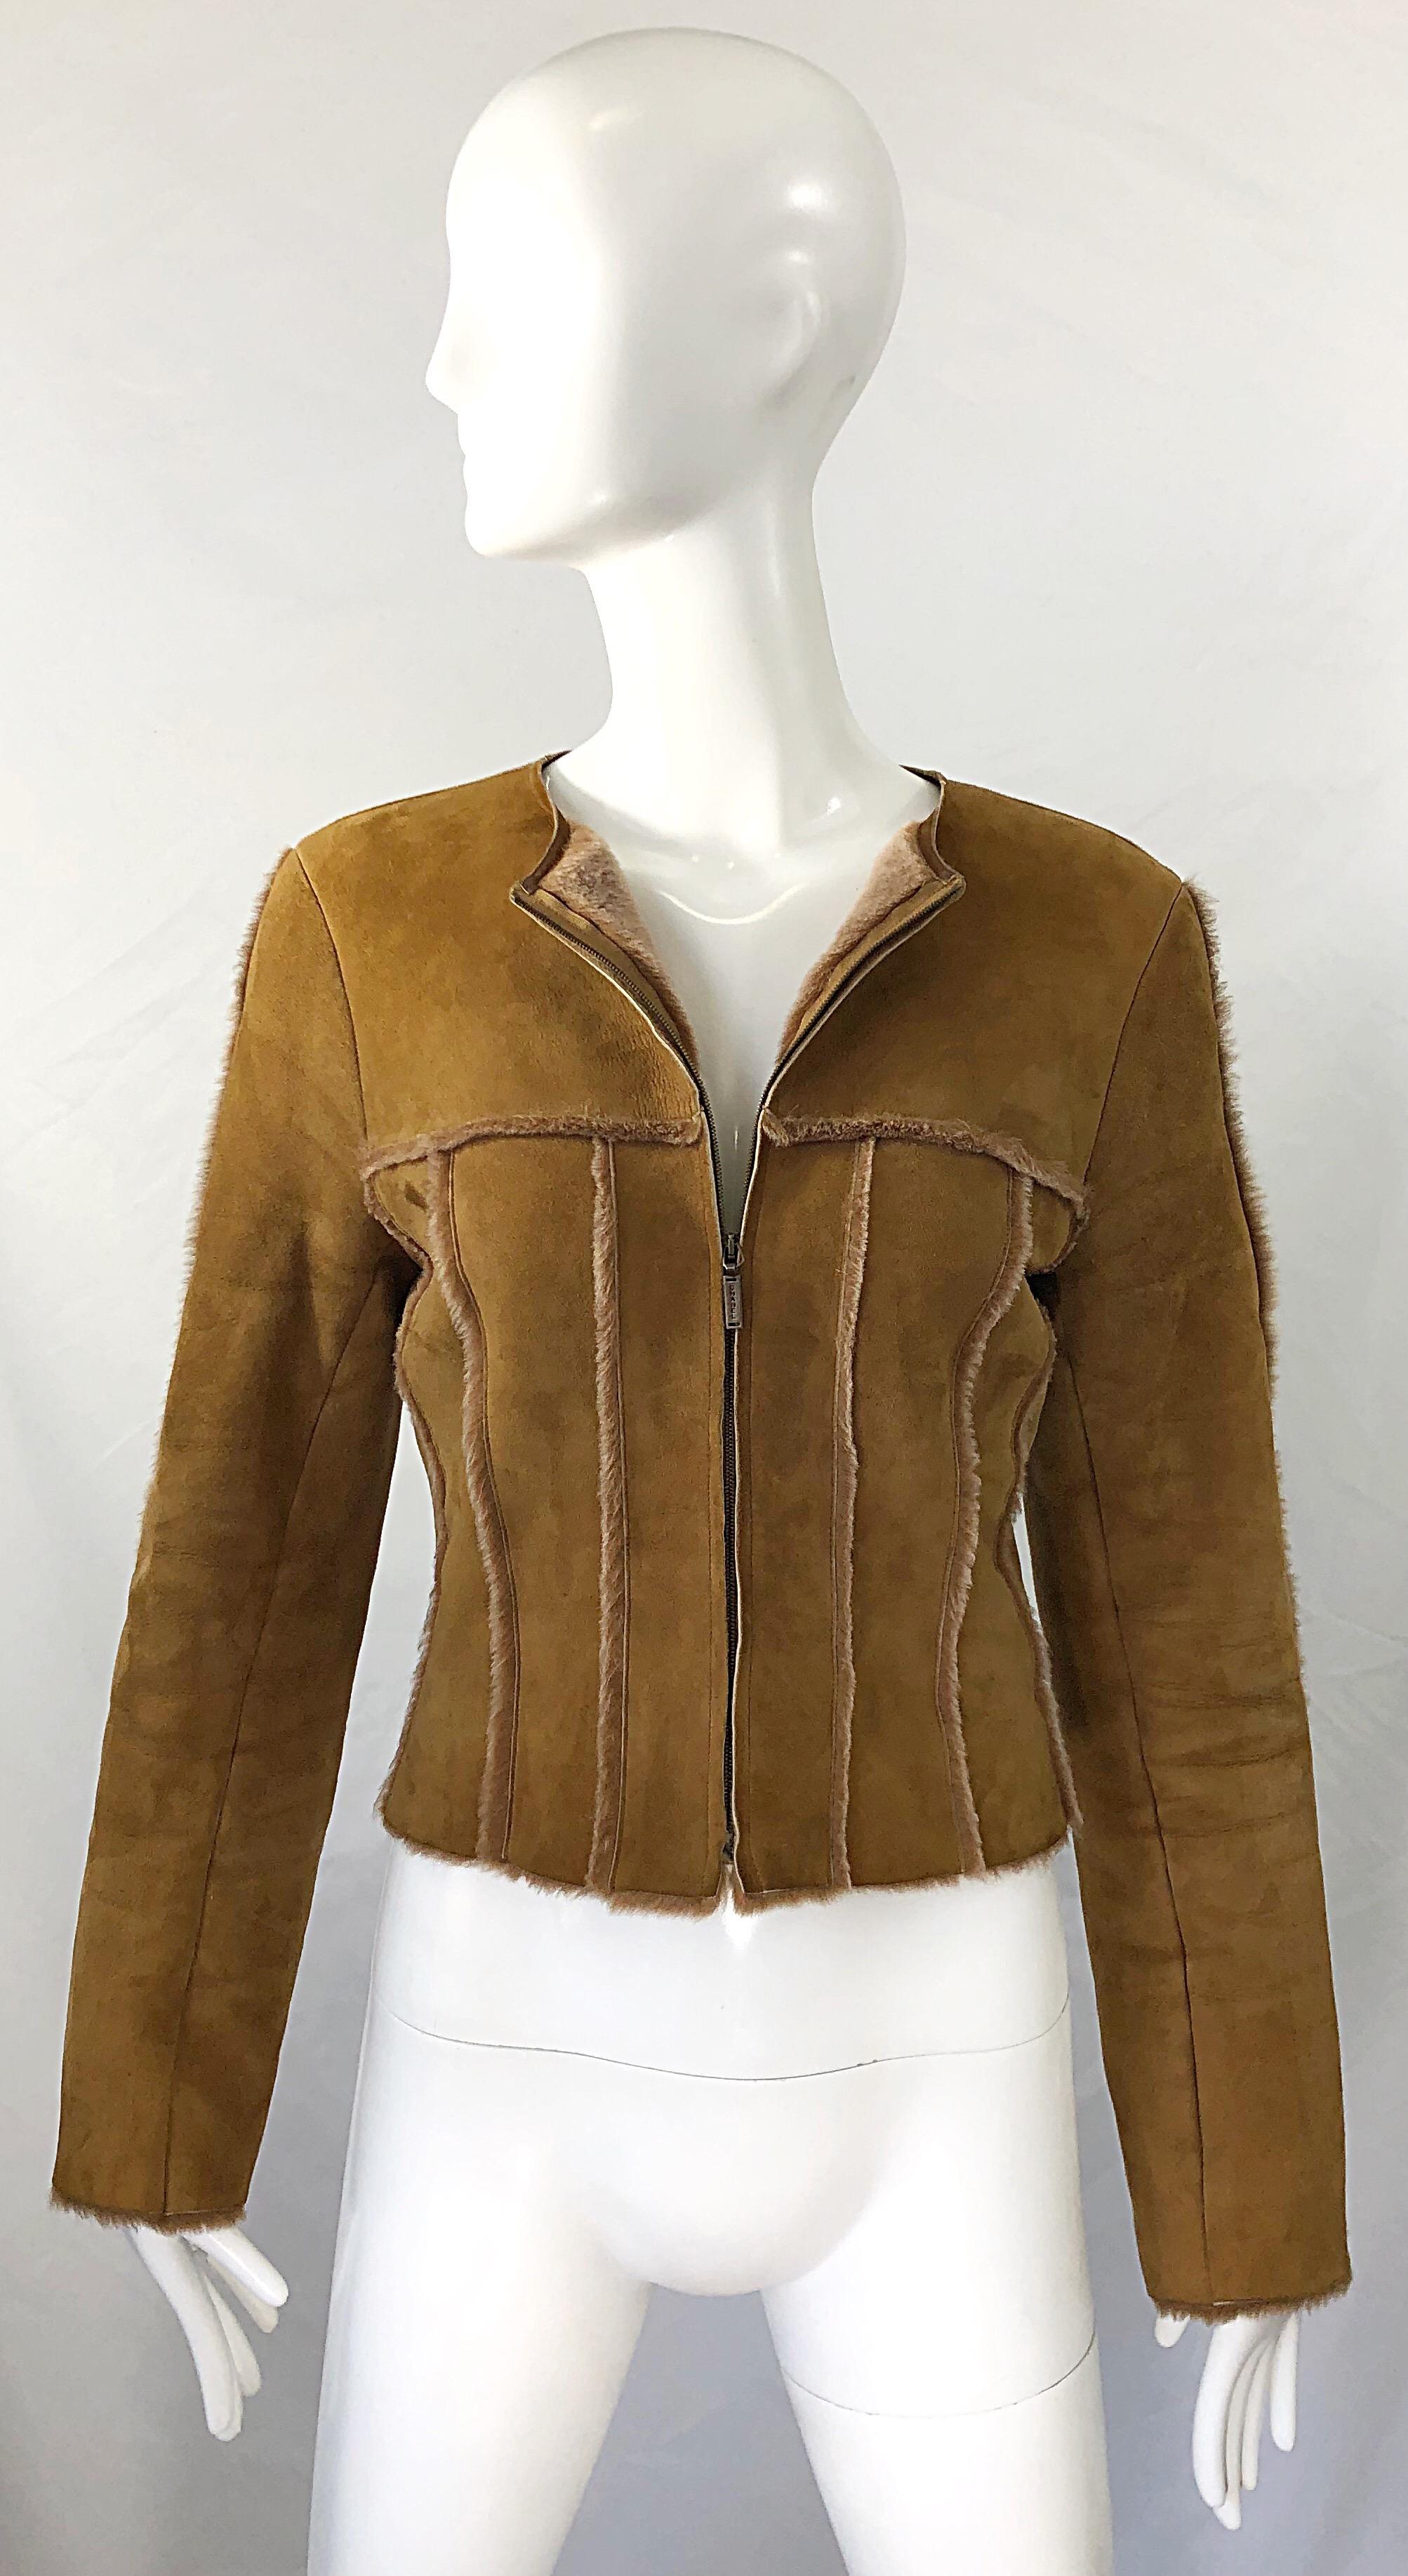 Chic vintage CHANEL Identification Fall 1999 by Karl Lagerfeld tan suede sheepskin cropped moto jacket ! The perfect color to match with anything. Fully lined with super soft plush sheepskin. Zipper up the front with Chanel embossed zipper. Fur